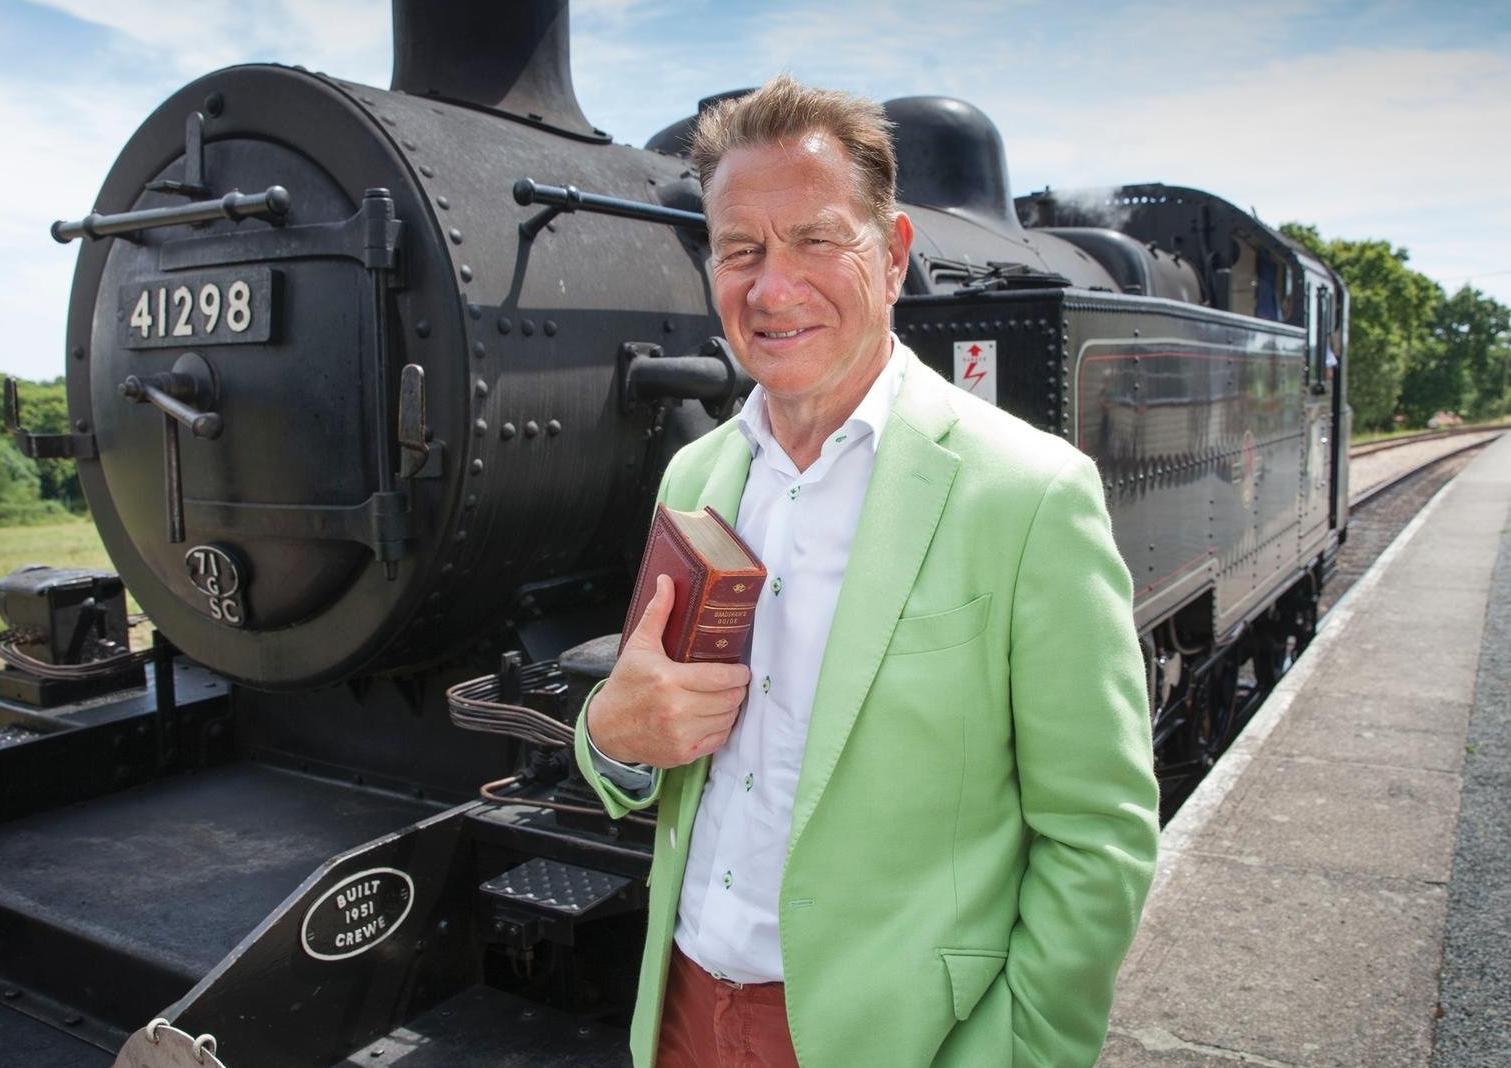 Former minister Michael Portillo now presents TV doucmentaries about the world's railway journeys.